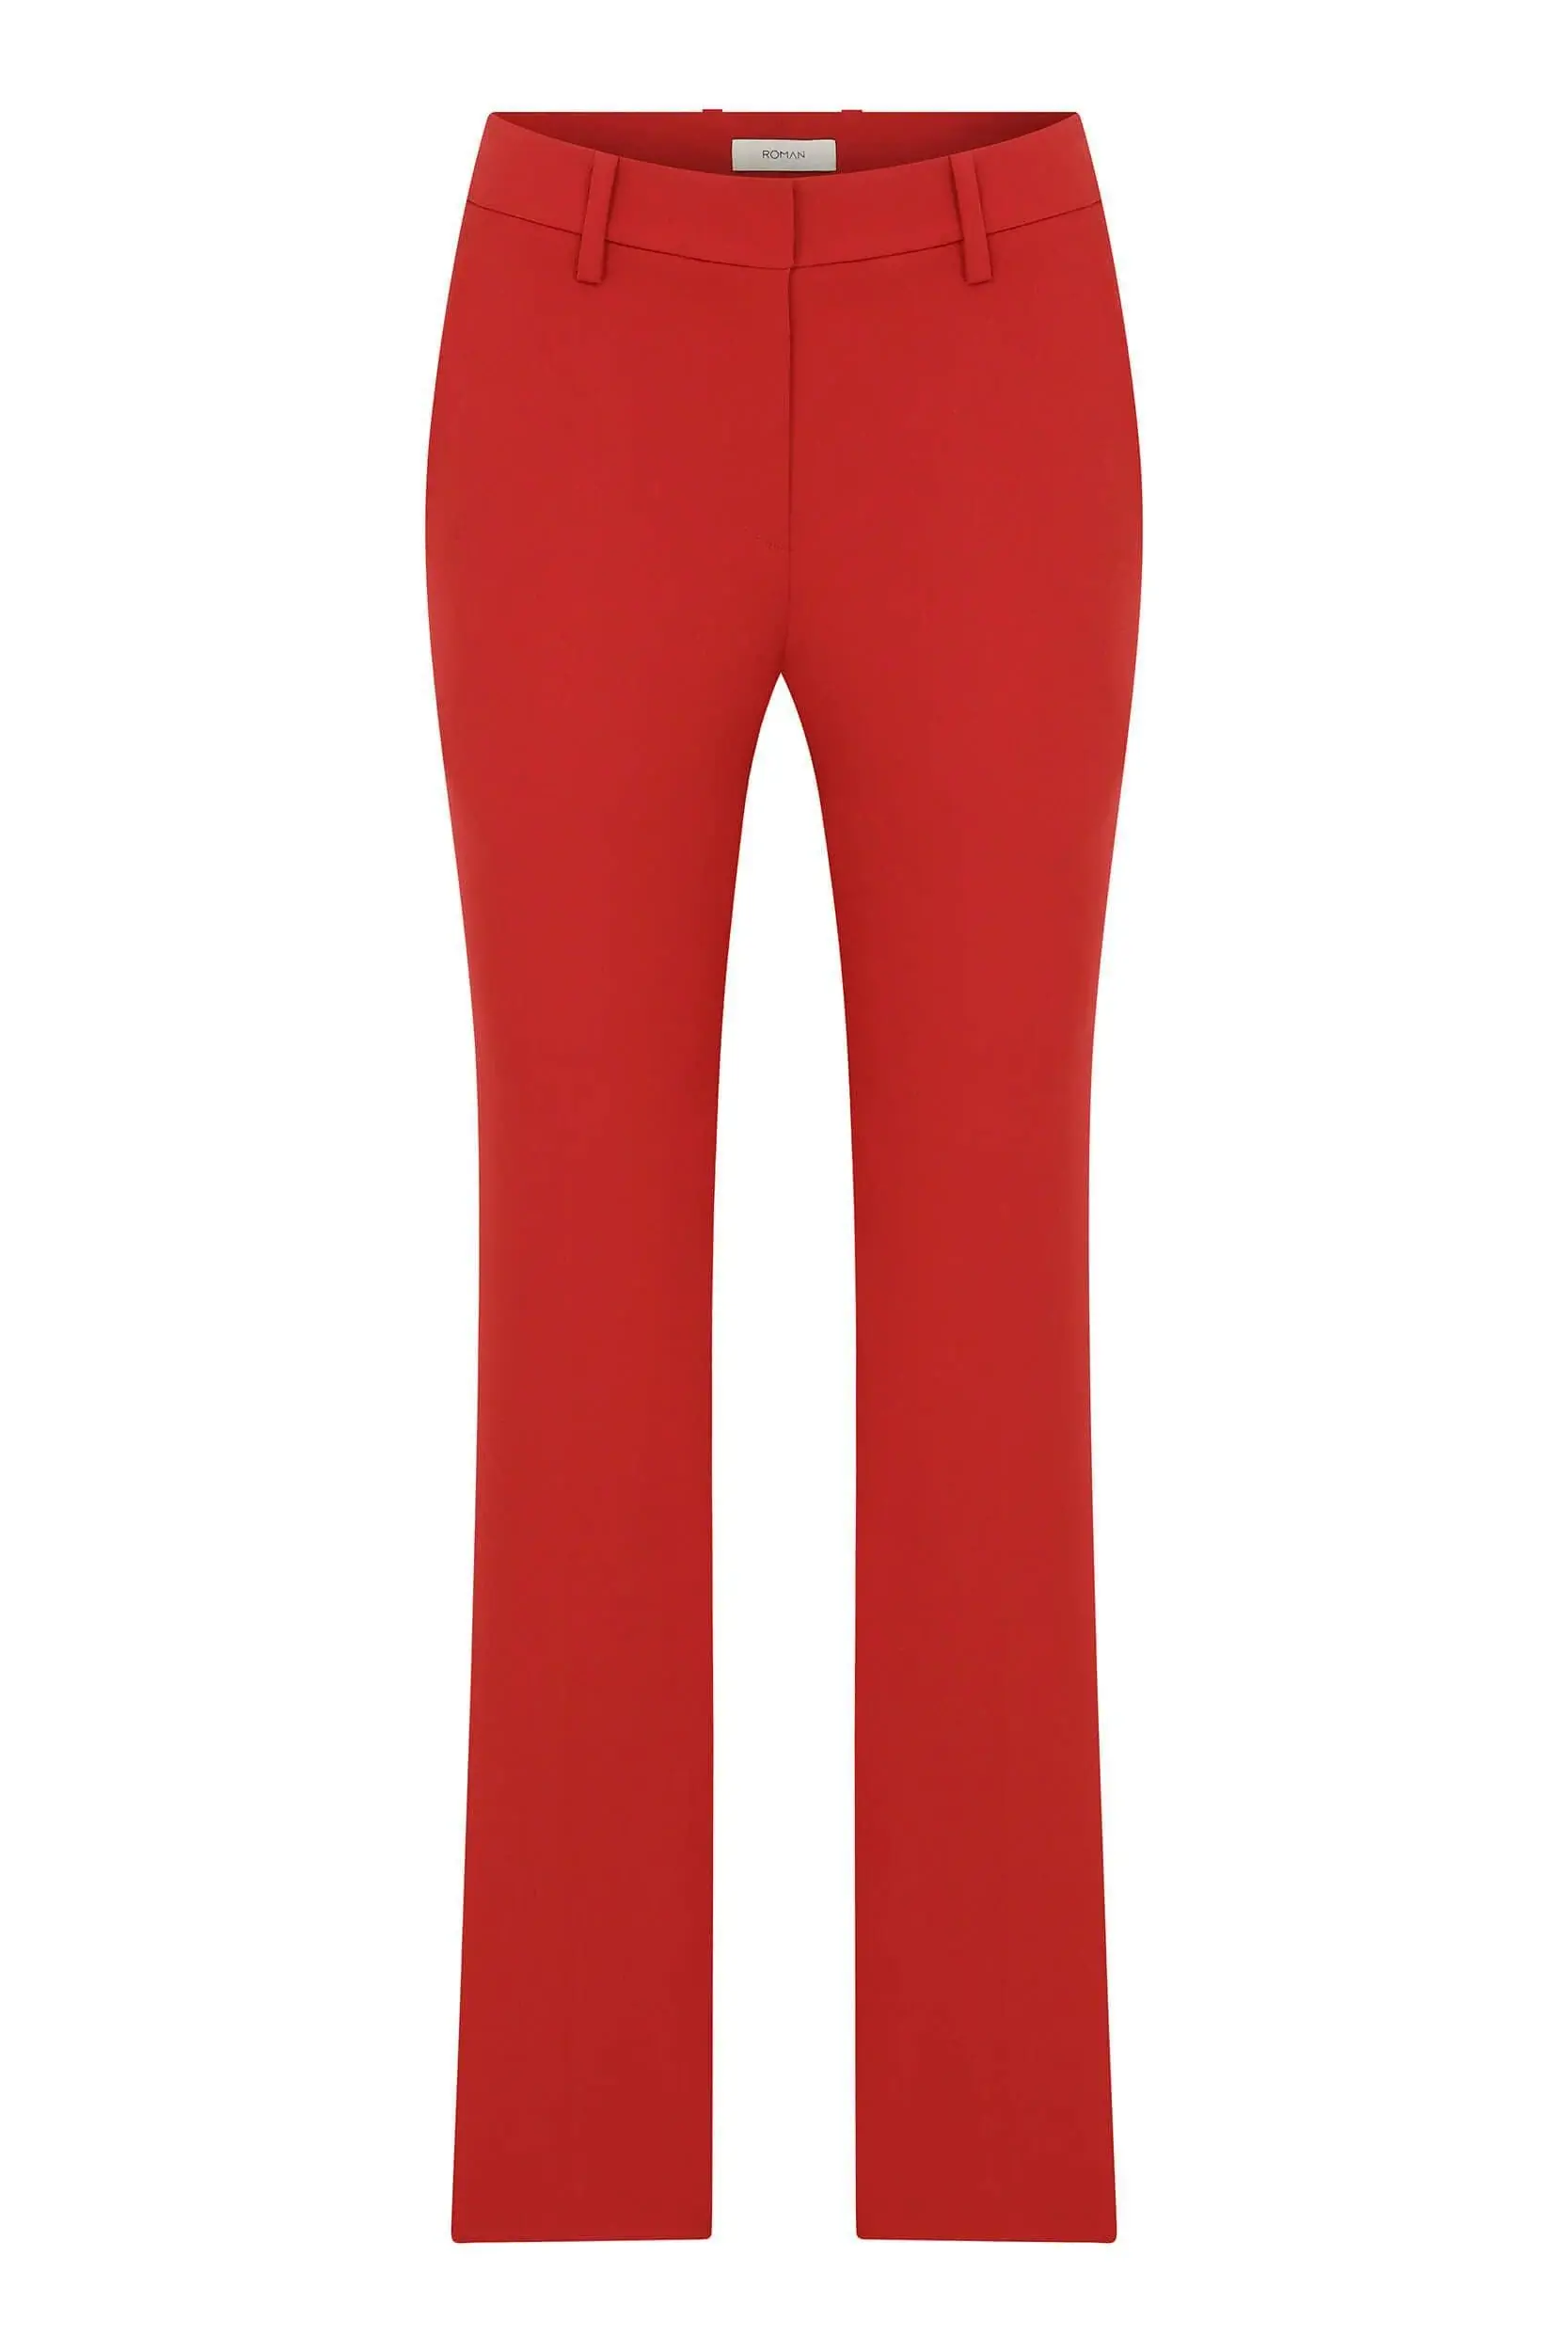 Roman Red Bootcut Casual Trousers. 2